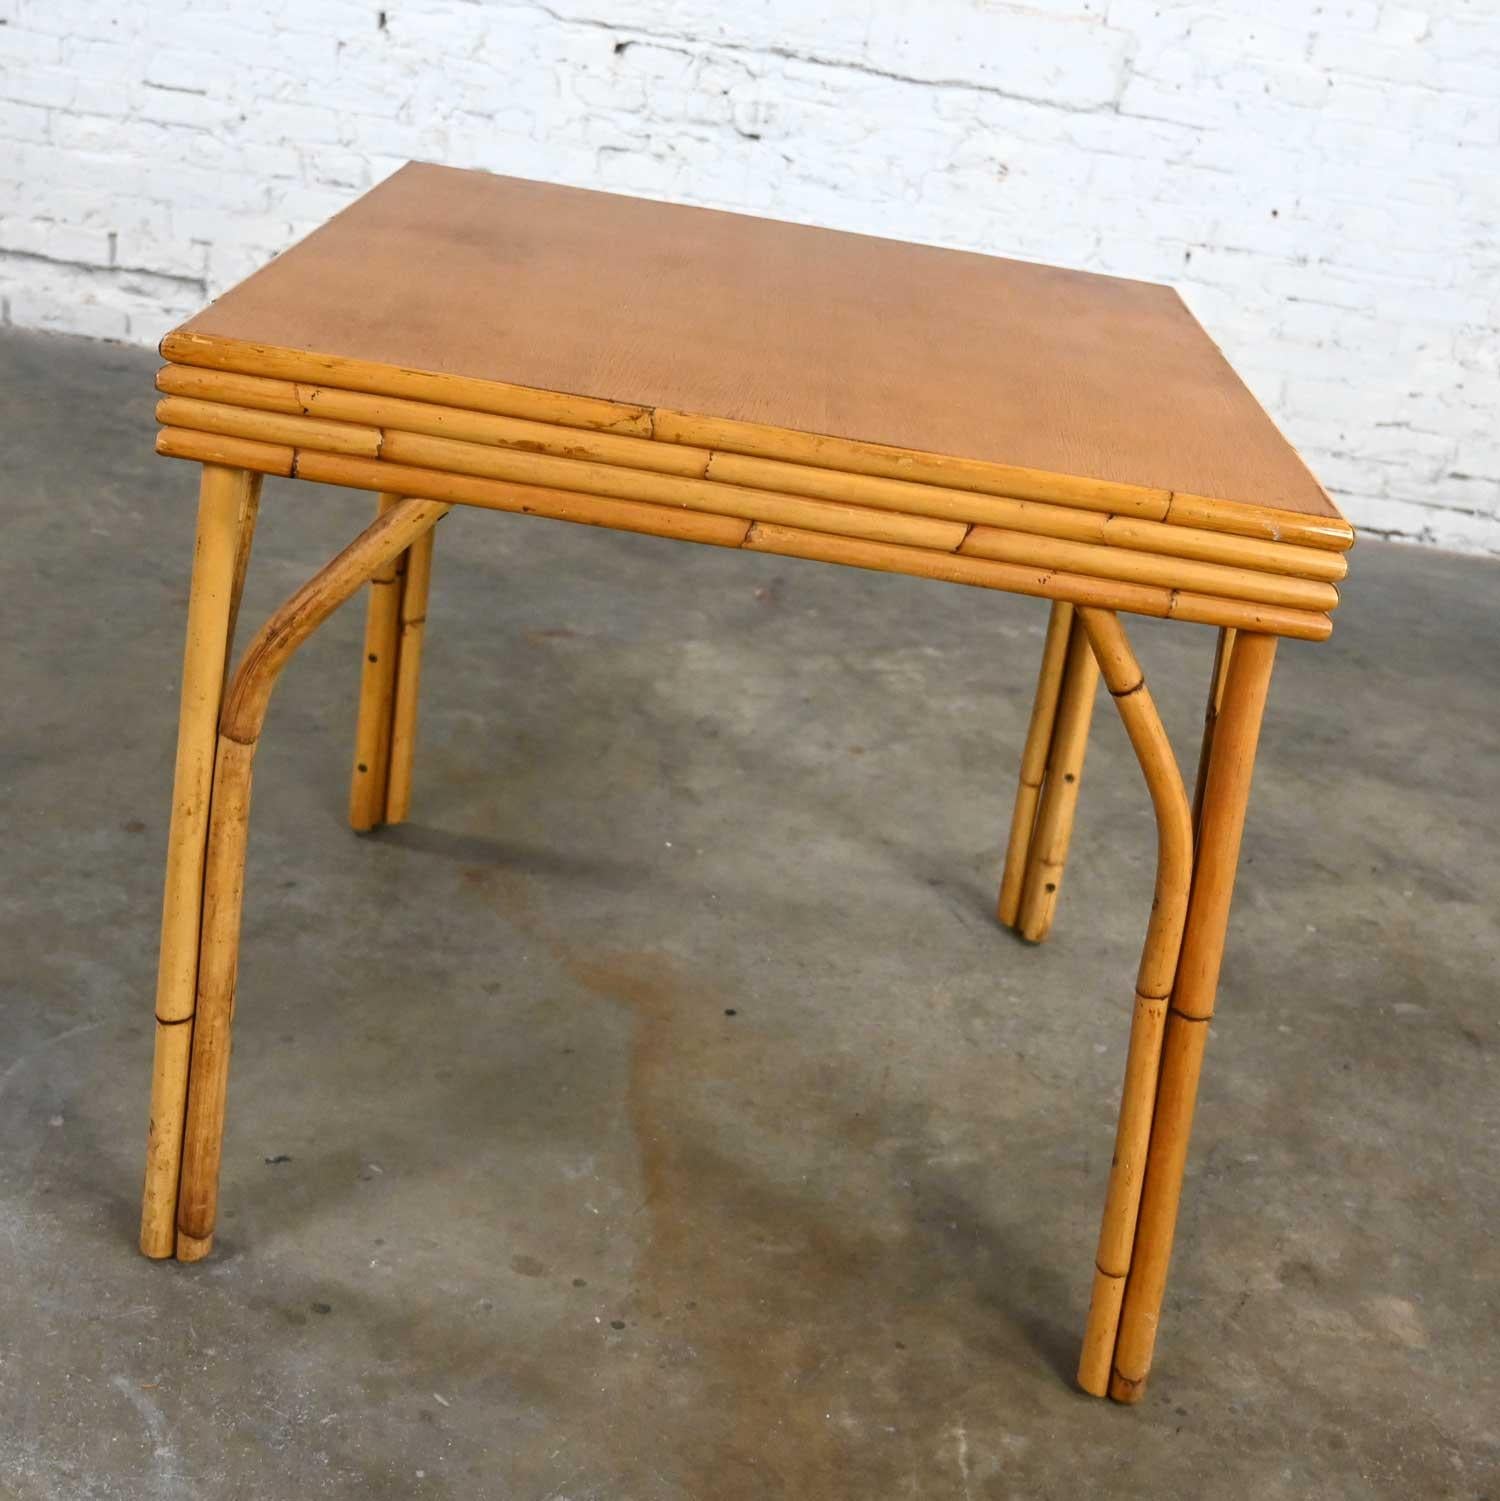 Lovely vintage organic modern Island style square rattan dining table with a mahogany top. Beautiful condition, keeping in mind that this is vintage and not new so will have signs of use and wear. The top has dark ring which we are choosing to let